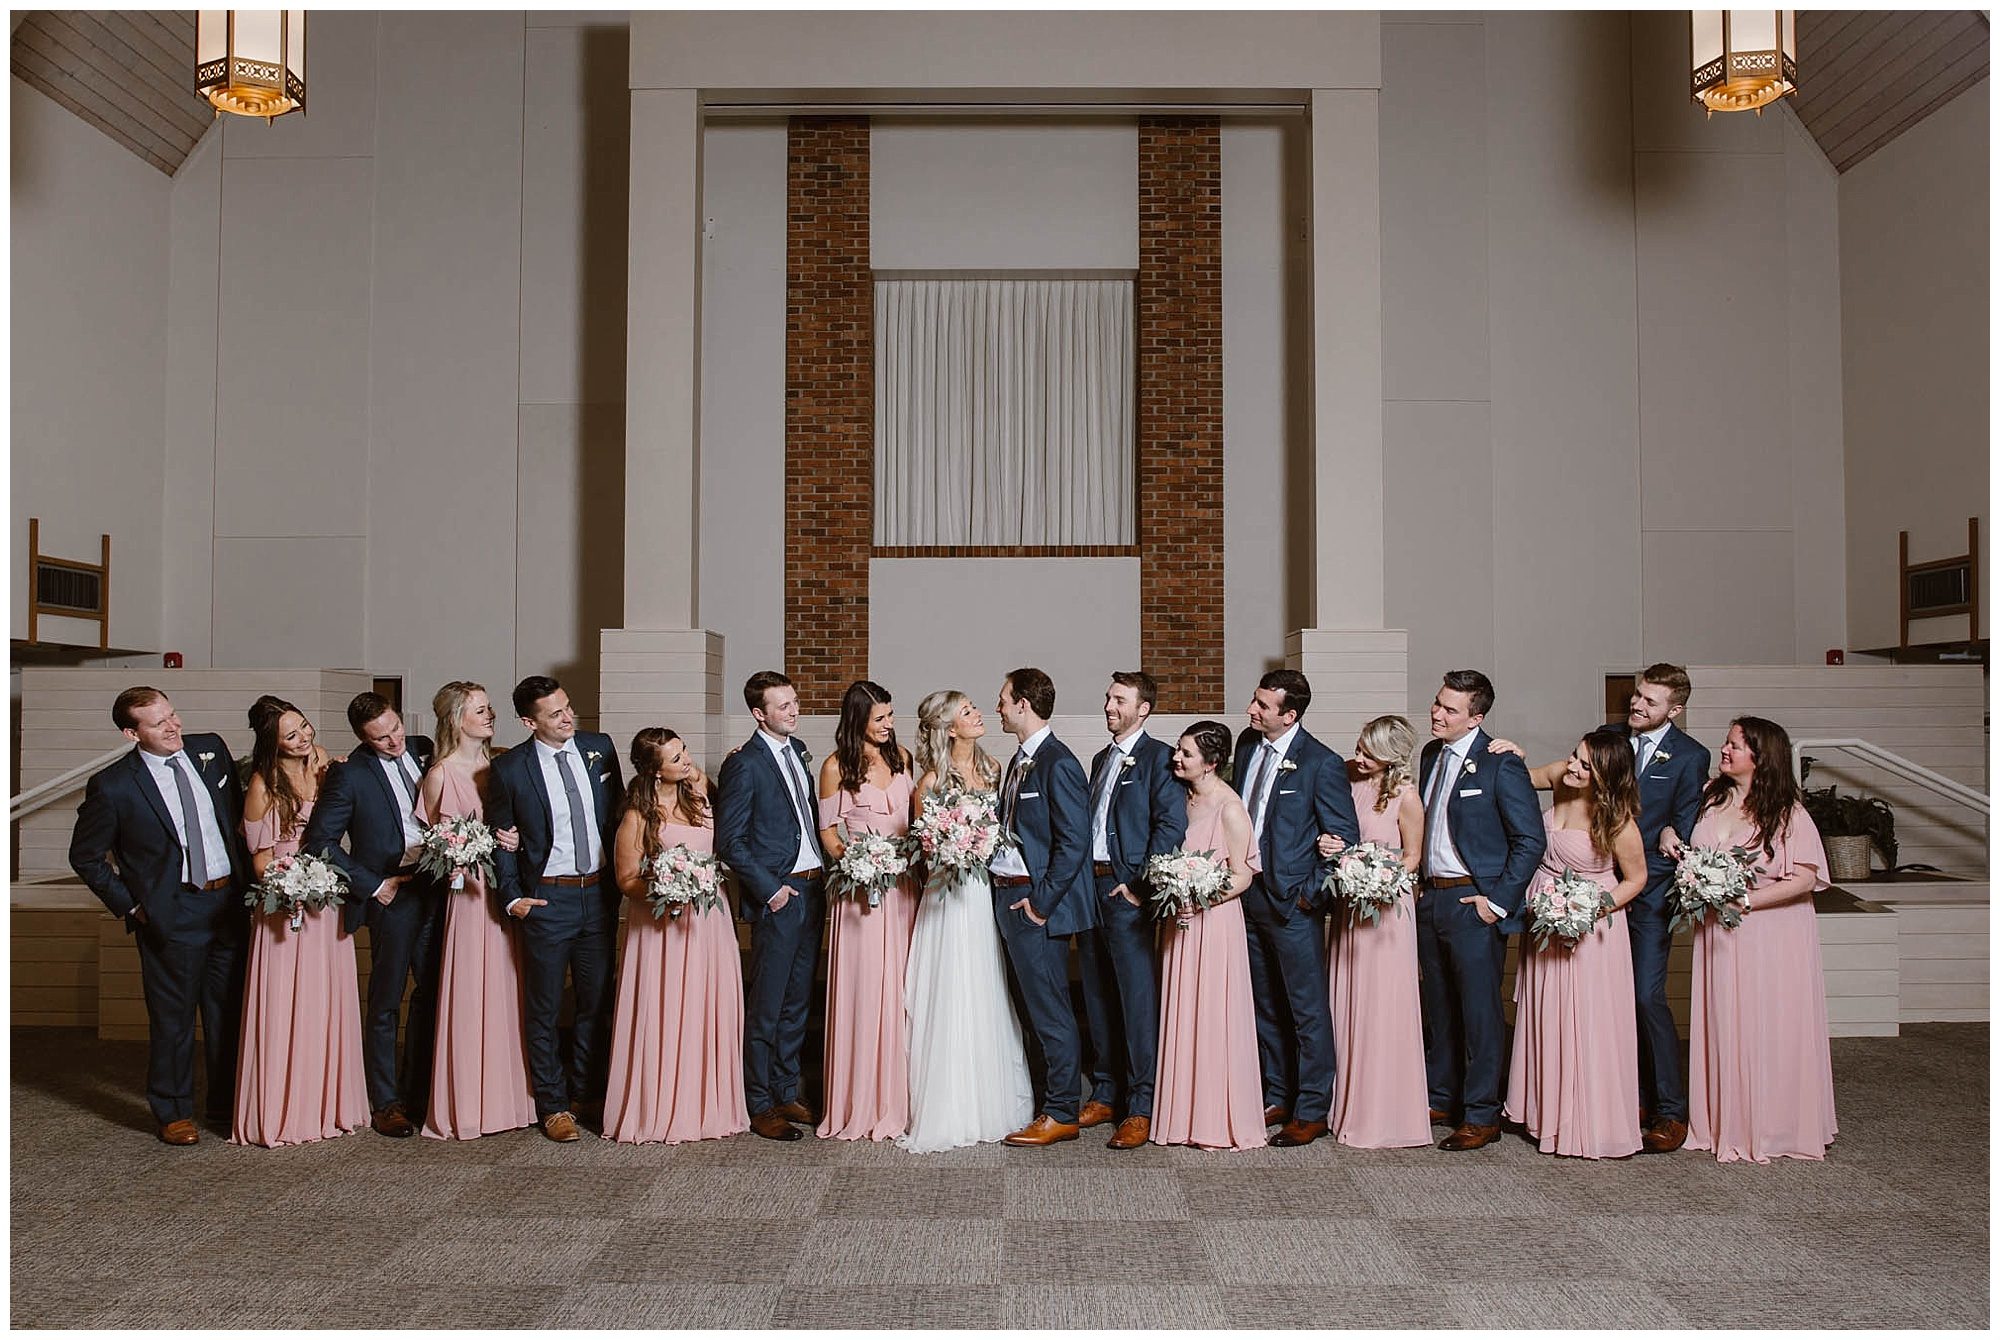 entire bridal party photographed in church